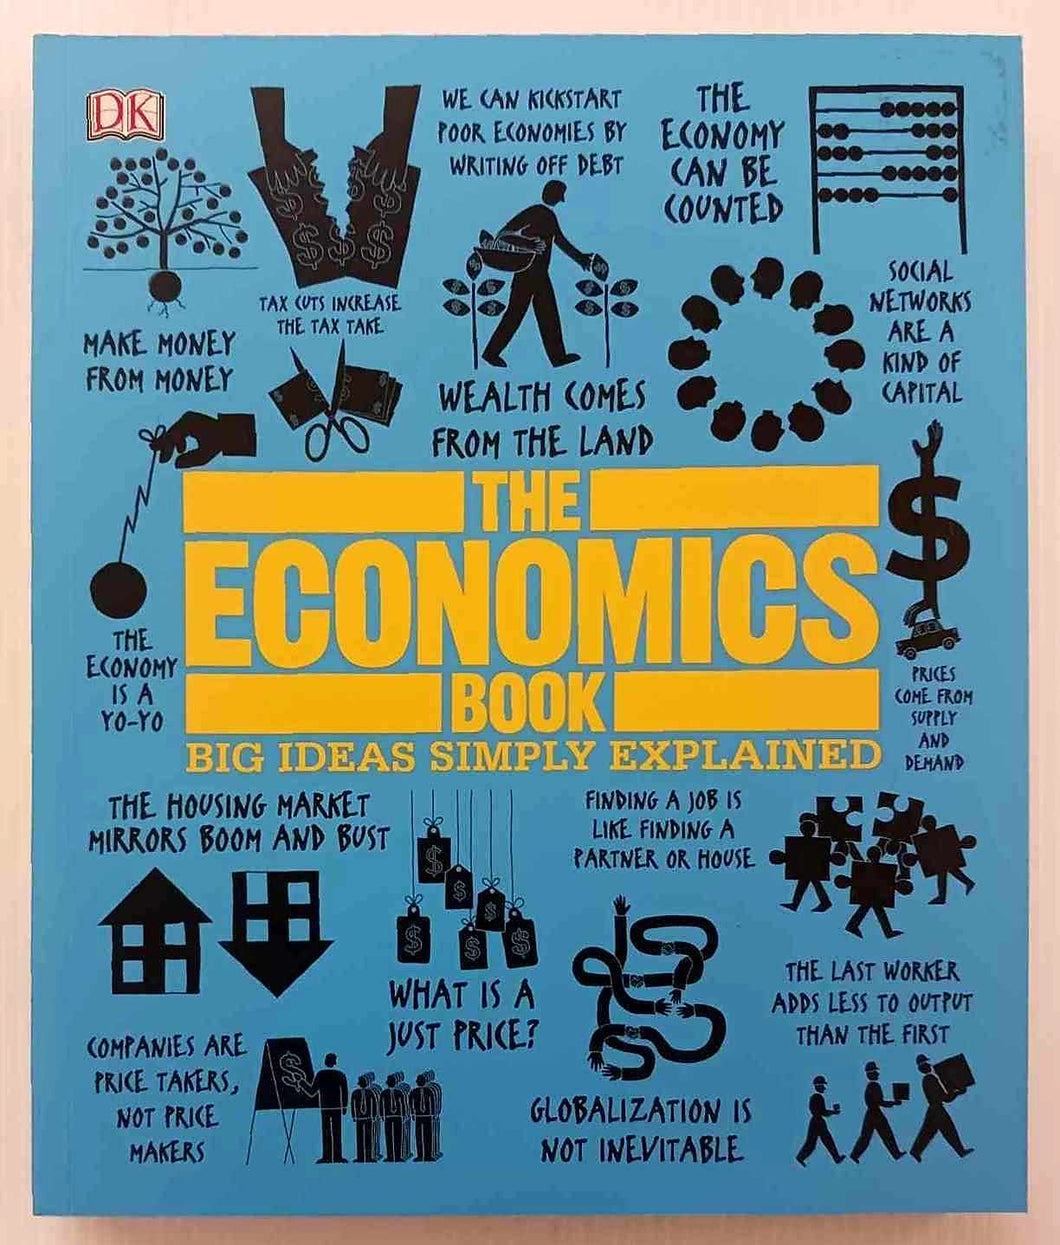 THE ECONOMICS BOOK - DK Publishing, Niall Kishtainy, George Abbot, John Farndon, Frank Kennedy, James Meadway, Christopher Wallace, Marcus Weeks, Lizzie Munsey